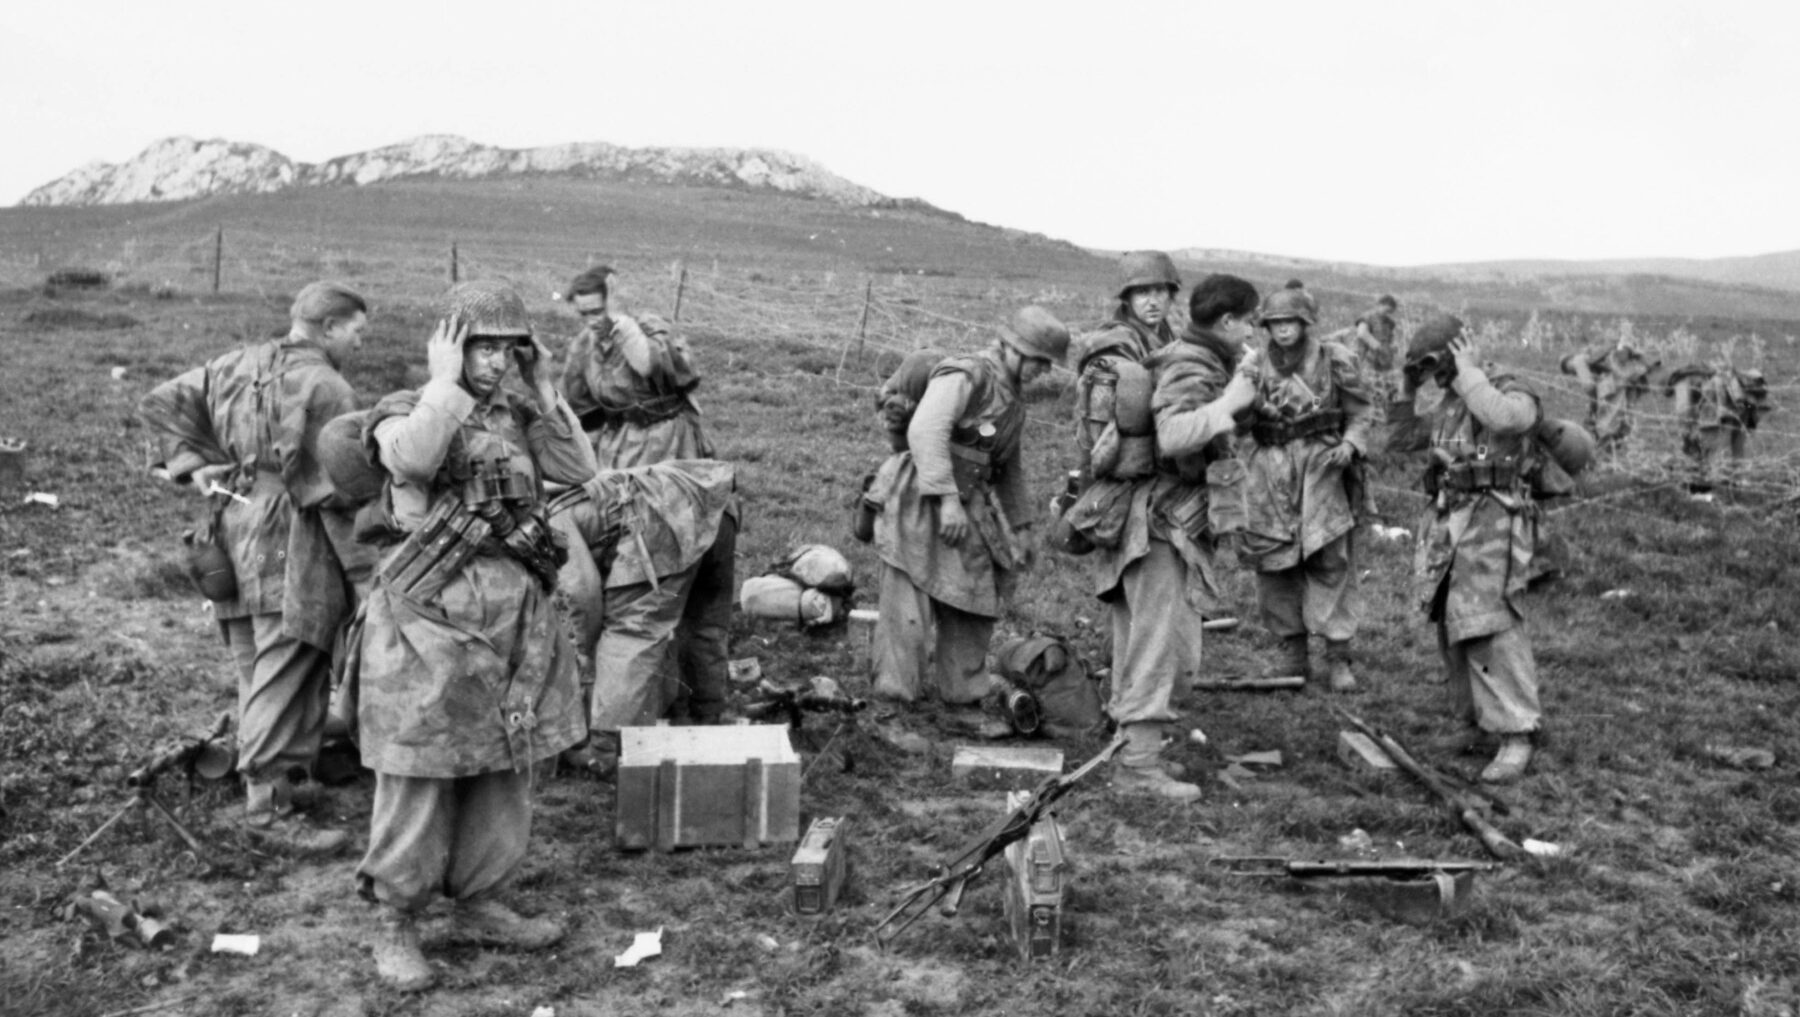 German infantrymen check weapons and stock up on ammunition during the battle for Kasserine Pass.